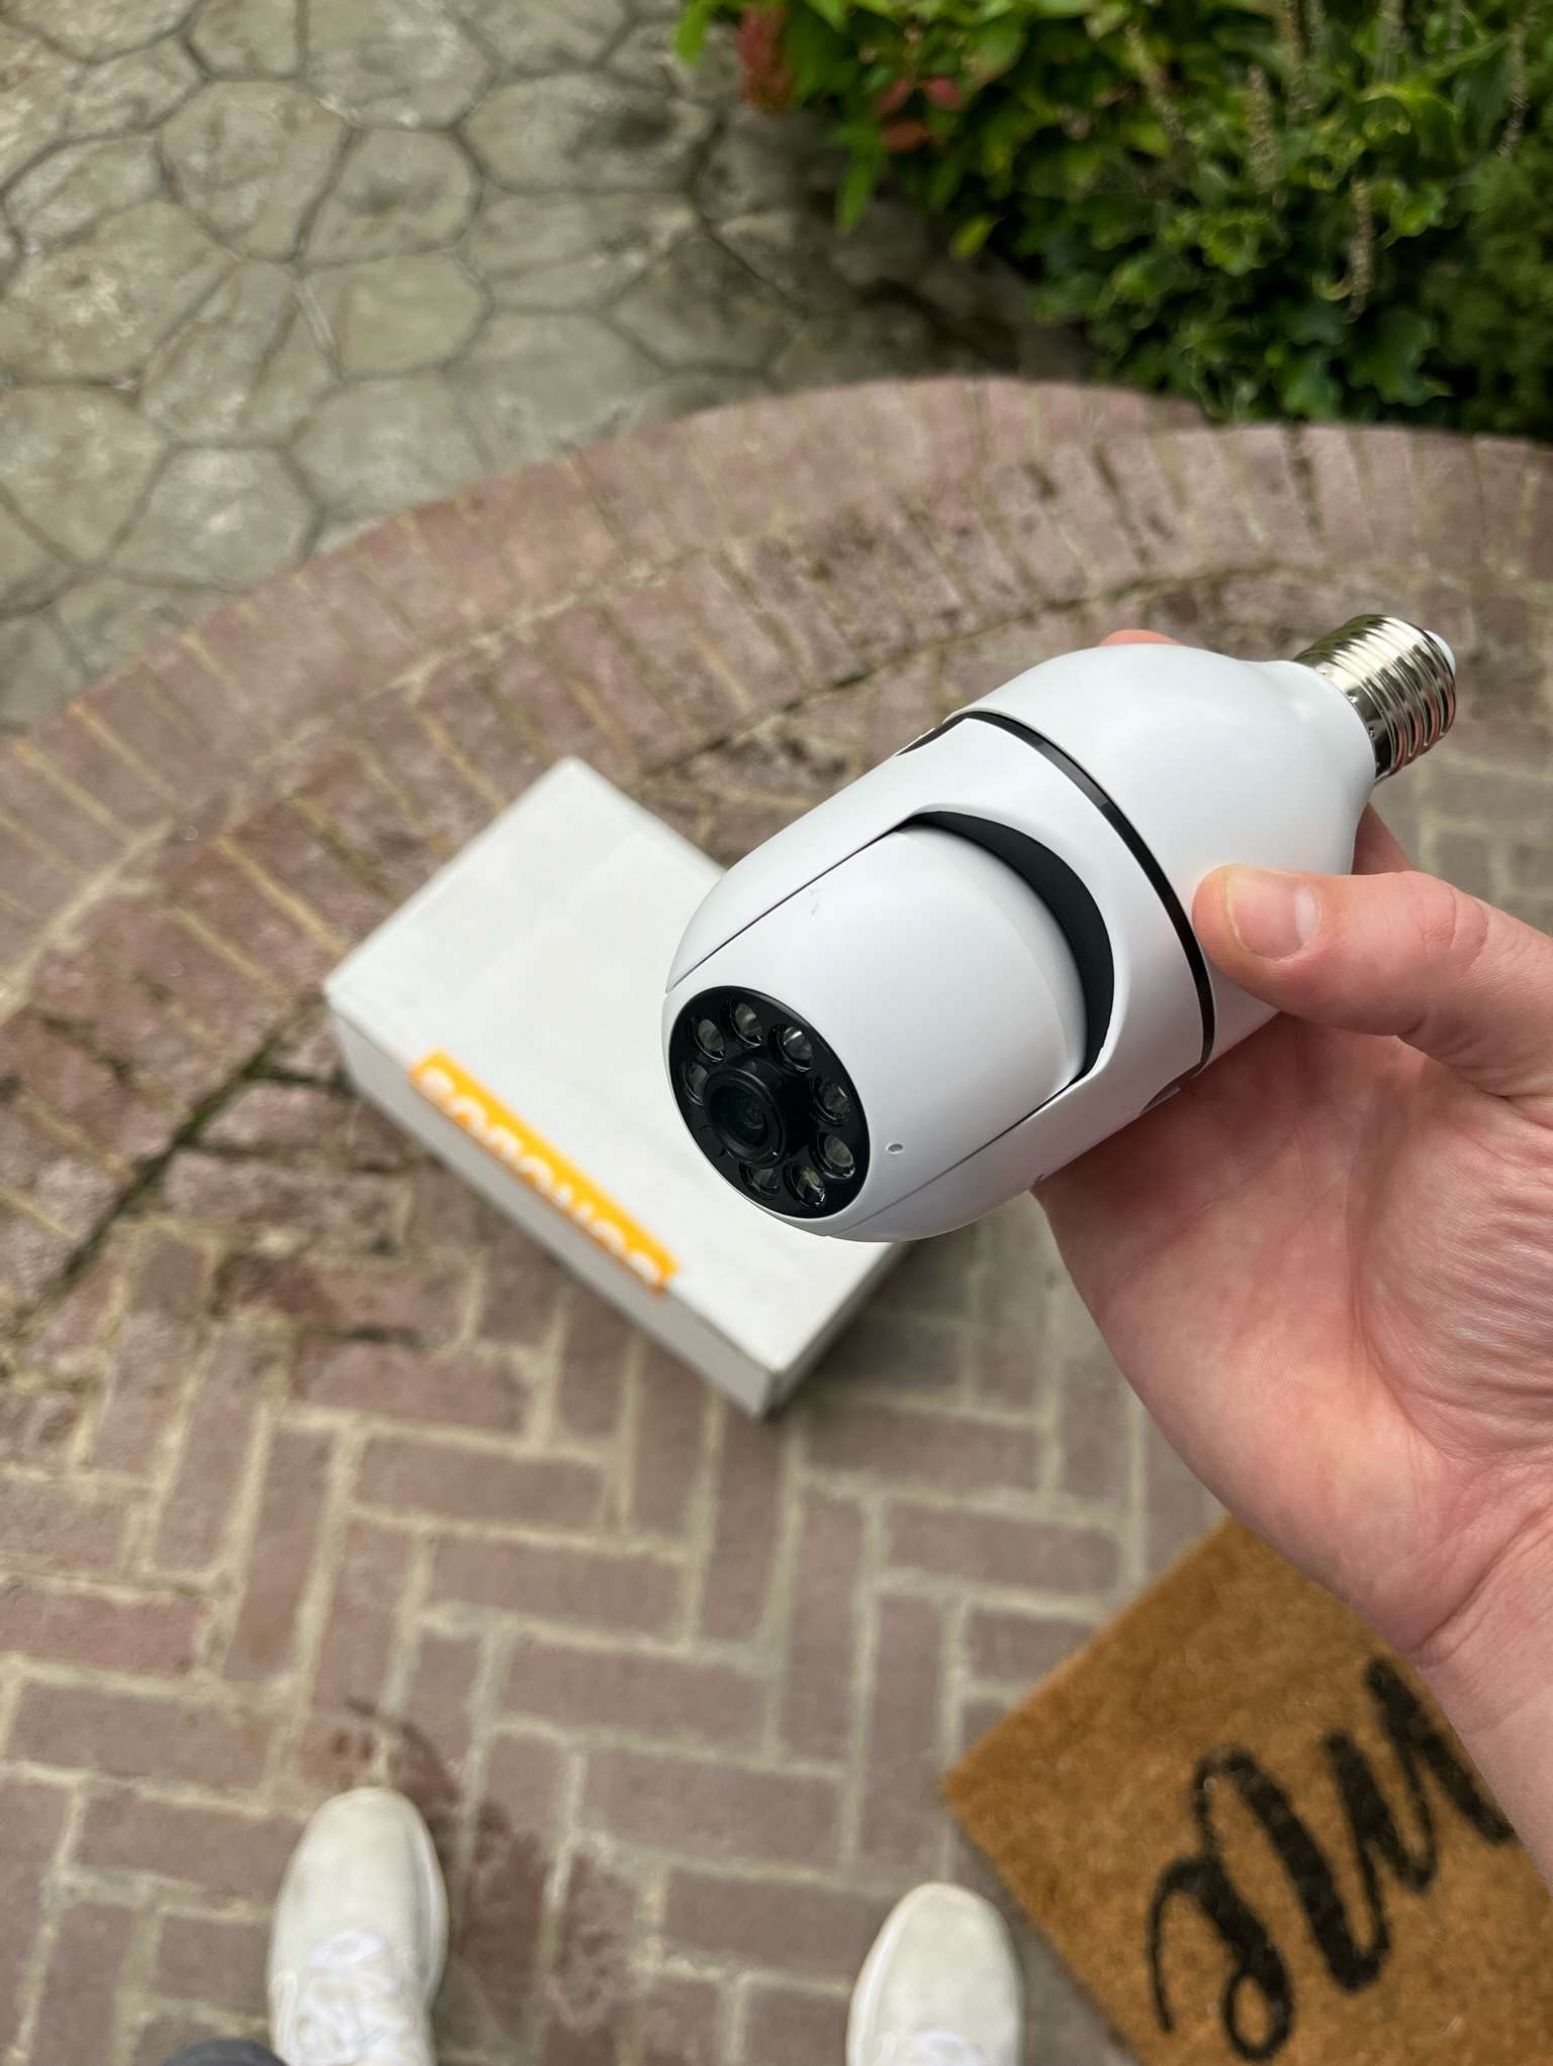 Customer Opinions About Nomad Security Camera